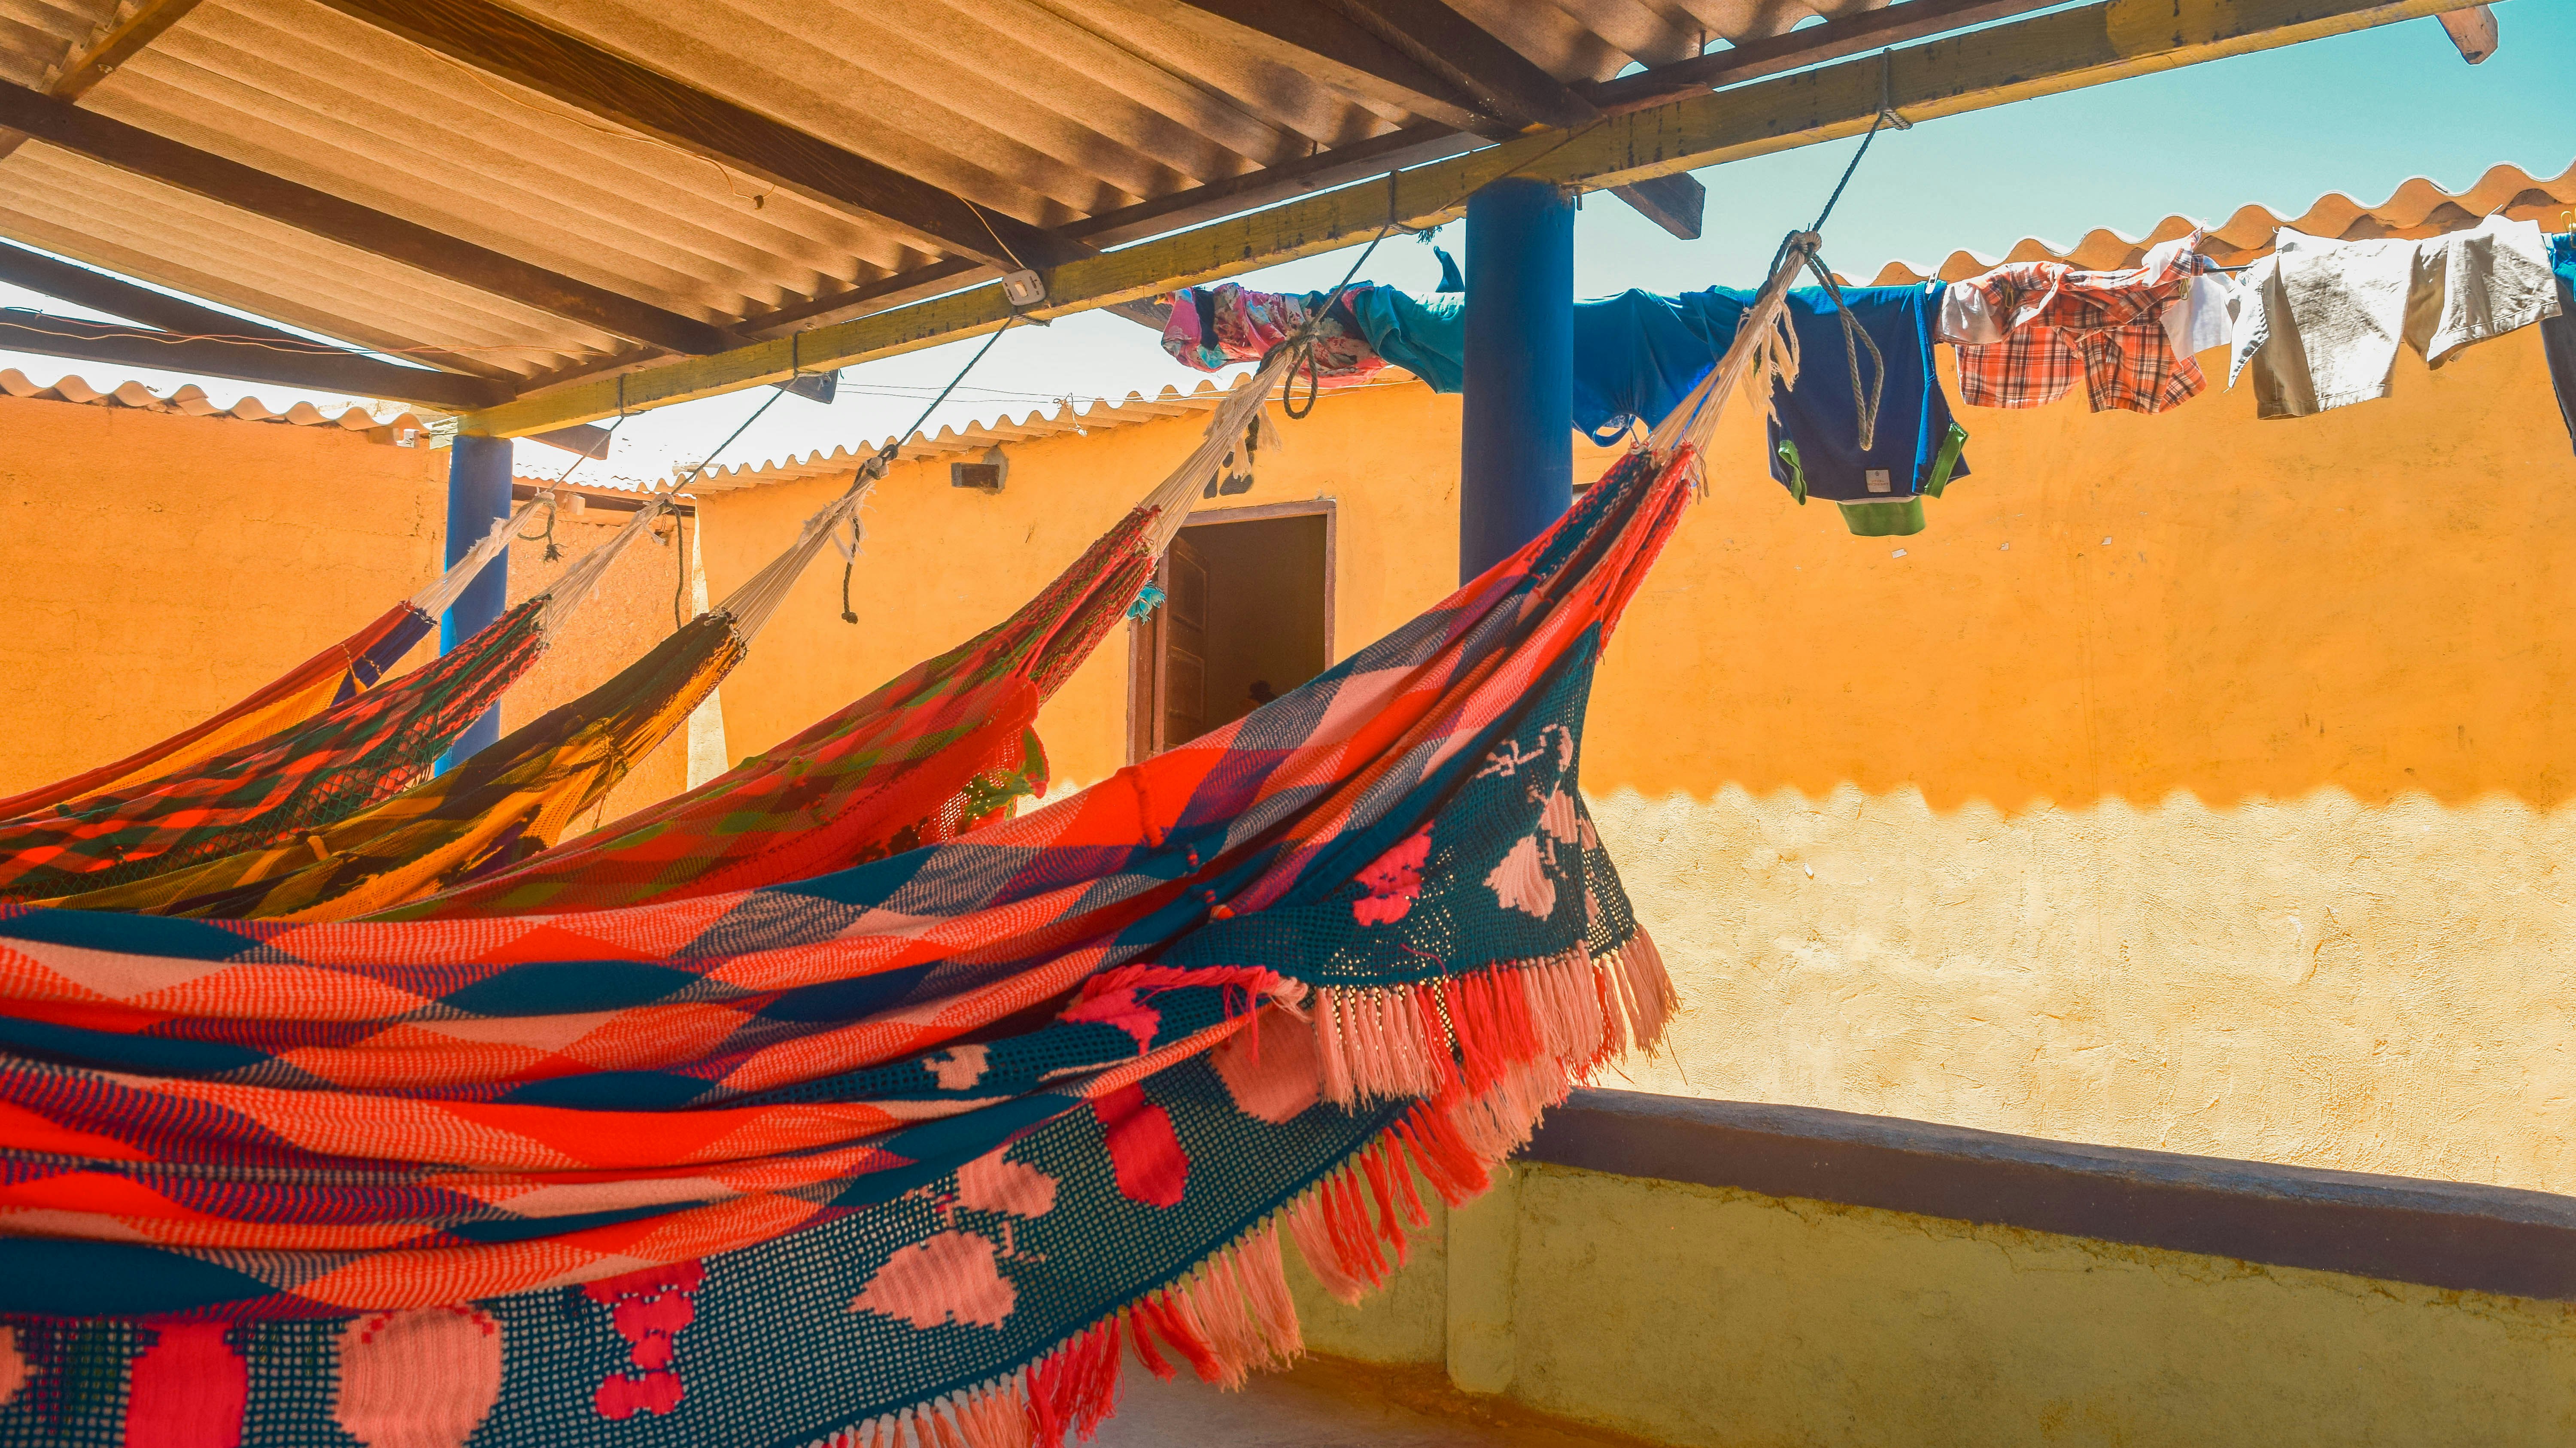 Five bright, patterned hammocks are strung up in a shelter, under a corrugated roof.